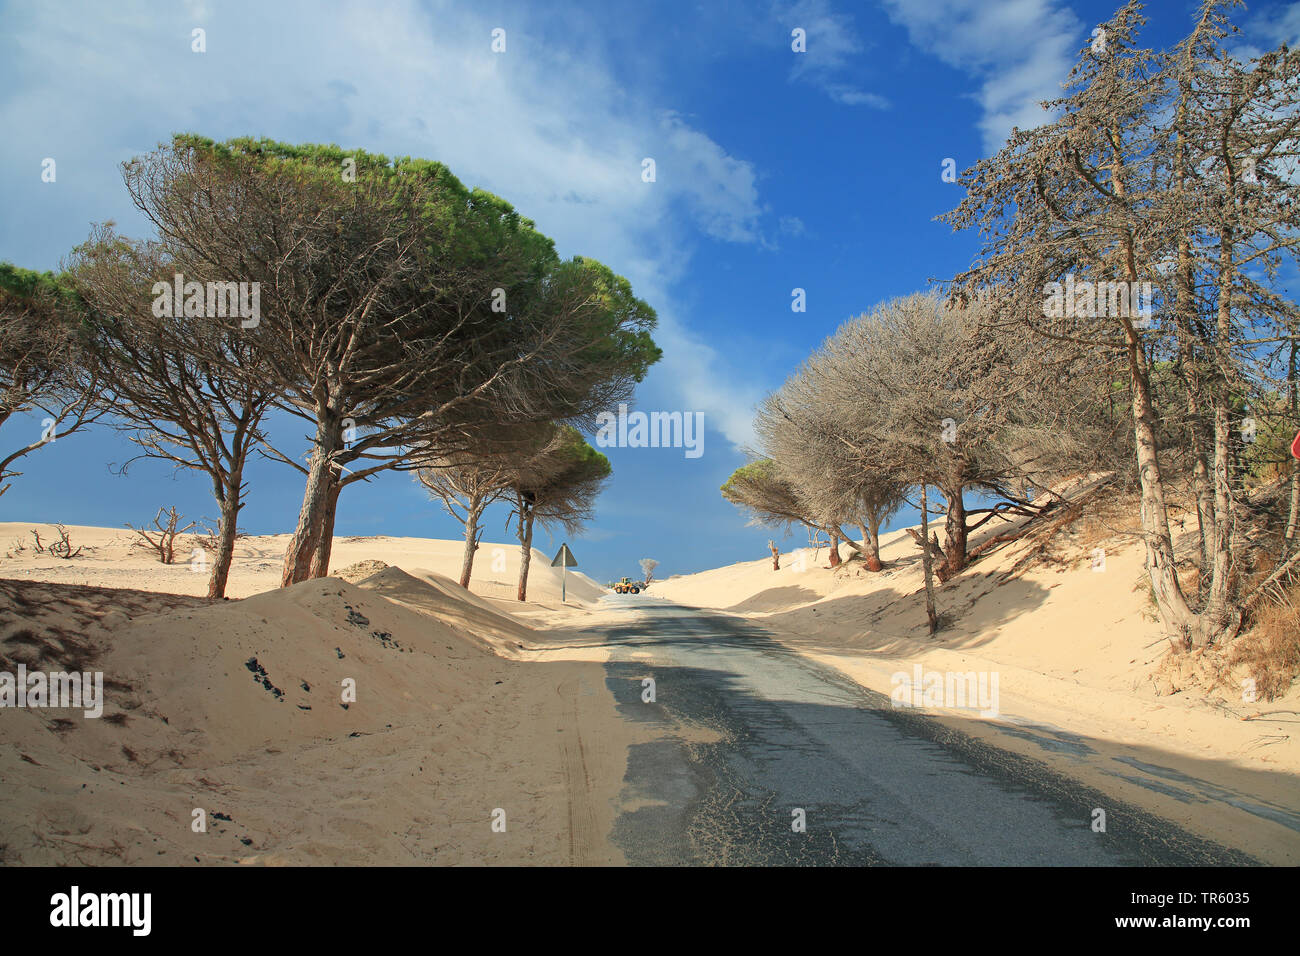 Stone pine, Italian Stone pine, Umbrella Pine (Pinus pinea), road between two shifting sand dunes keeping clear by an excavator, Spain, Andalusia, Bolonia Stock Photo